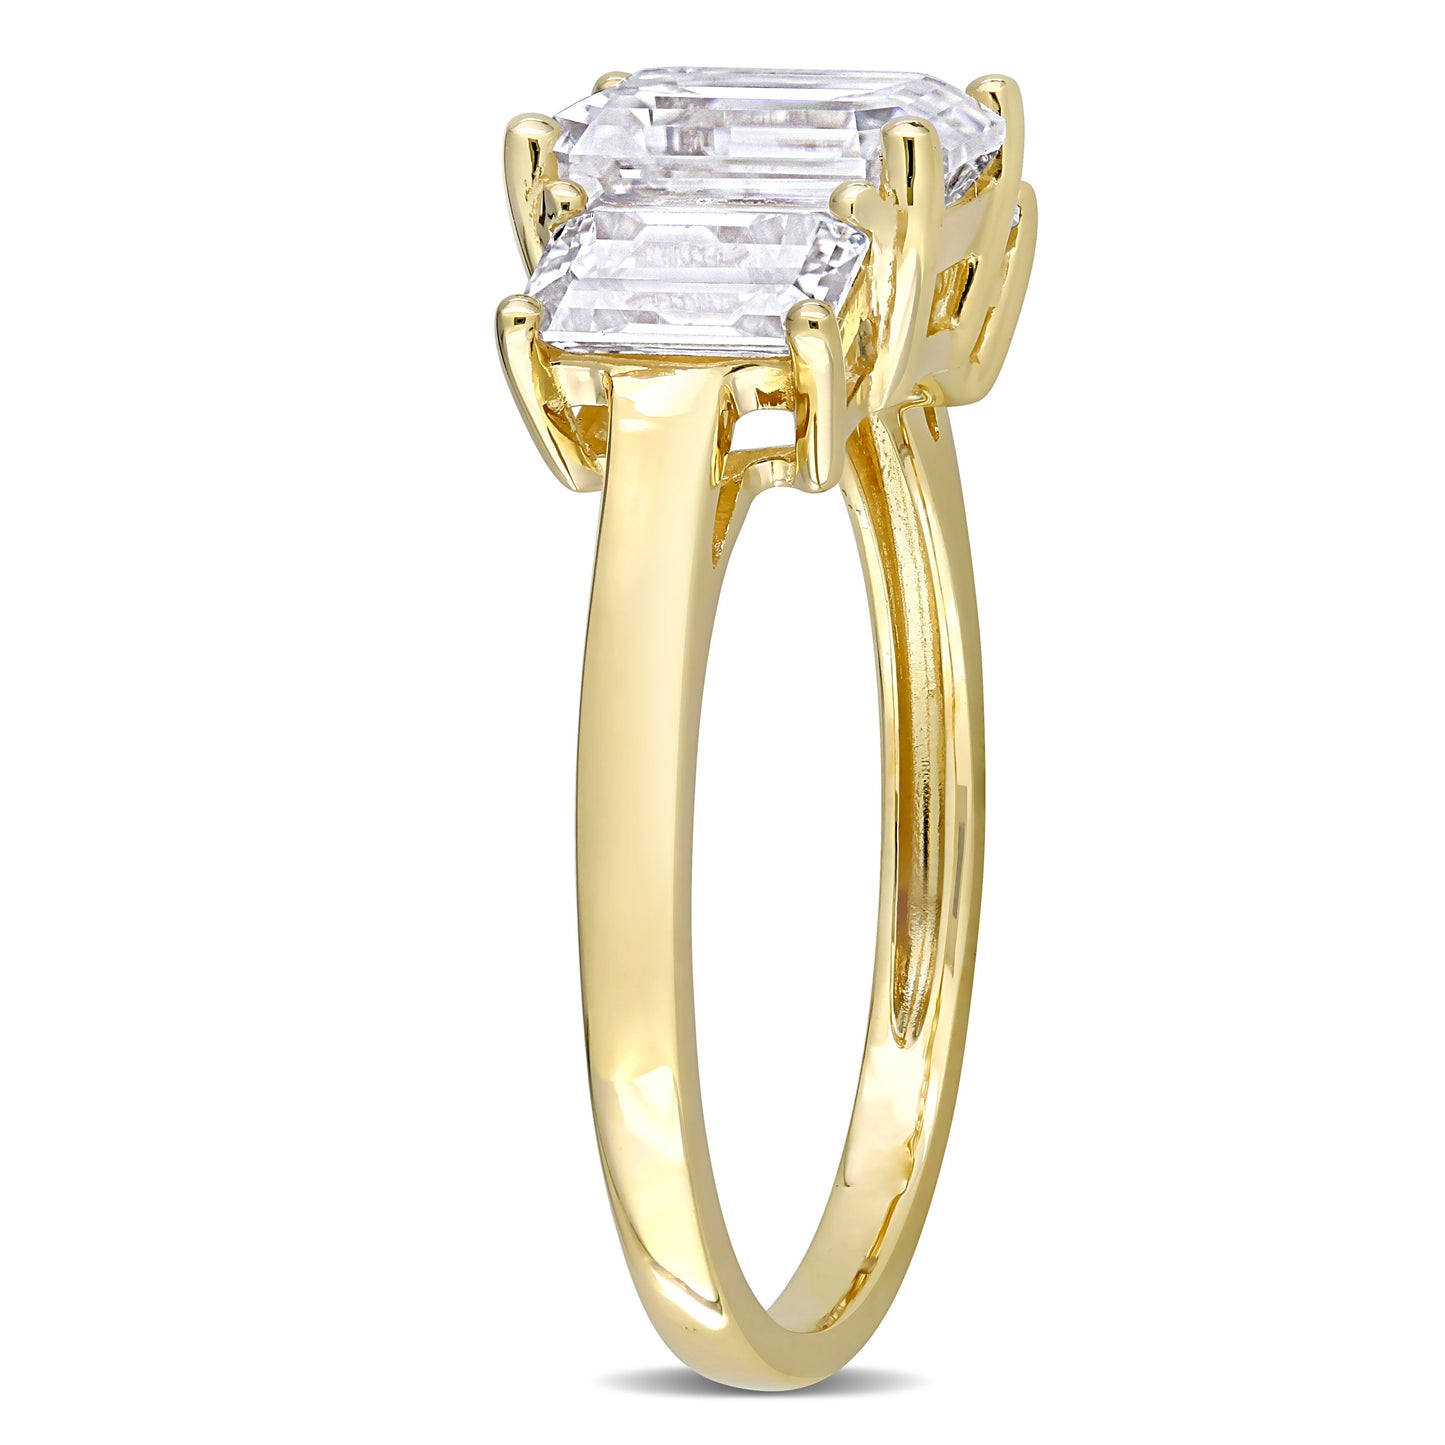 3-Stone Emerald Moissanite Ring in 10k Yellow Gold